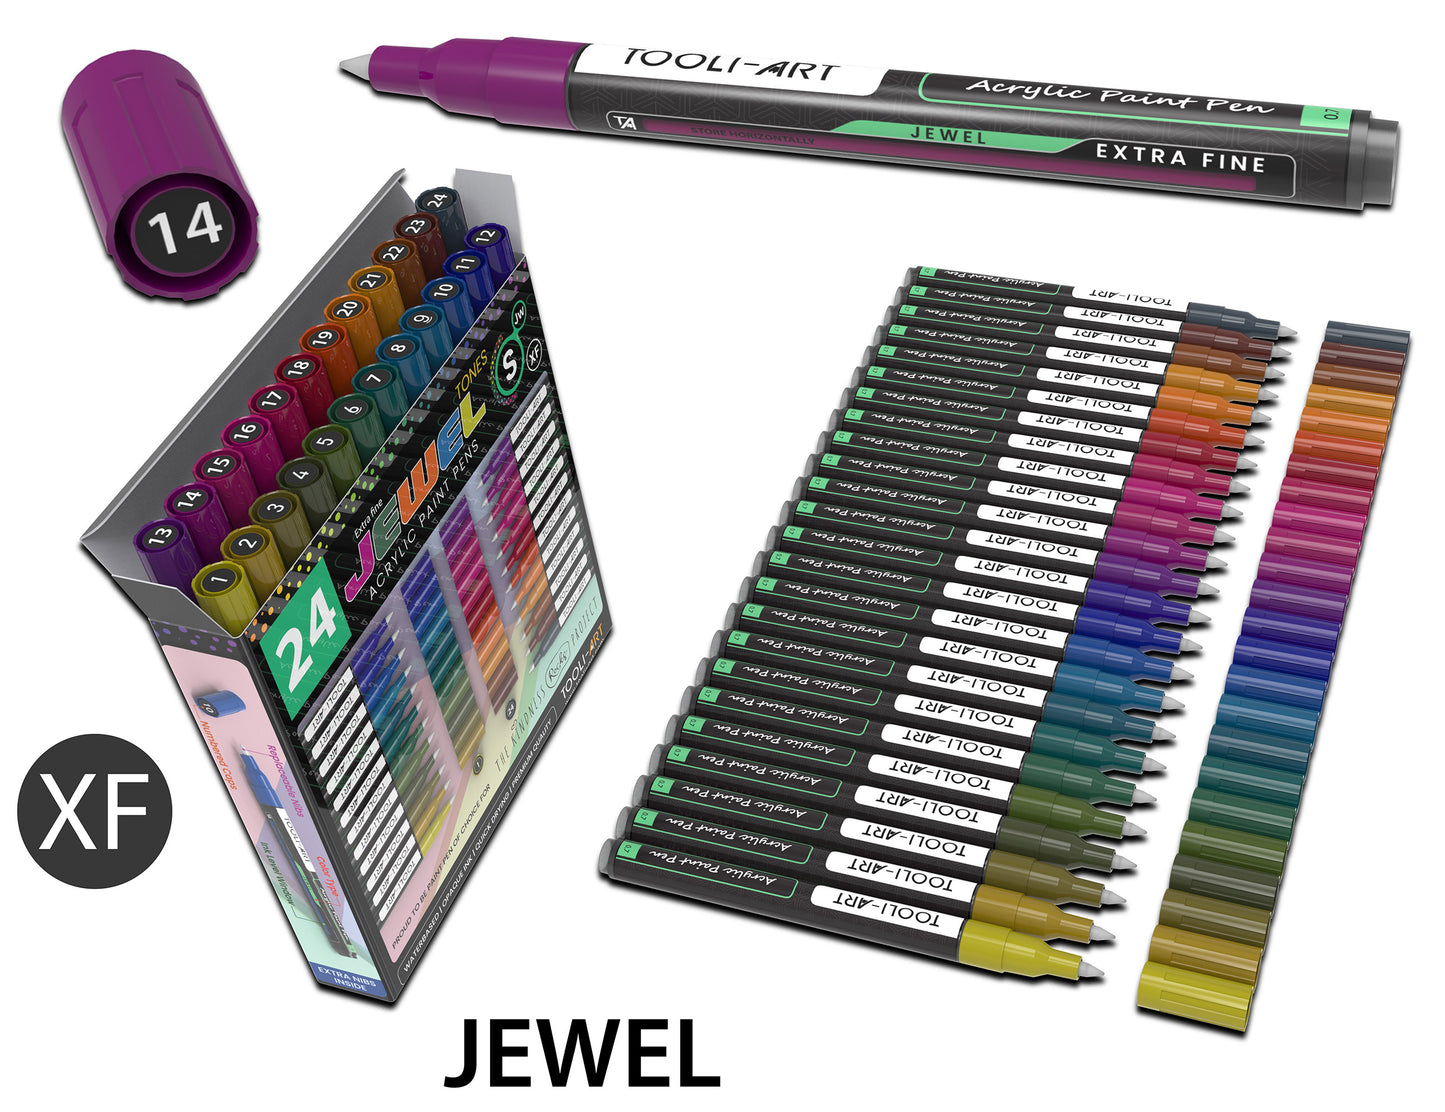 24 Jewel Dark Tones Acrylic Paint Pens Special Color Series Markers Set (0.7mm EXTRA FINE)